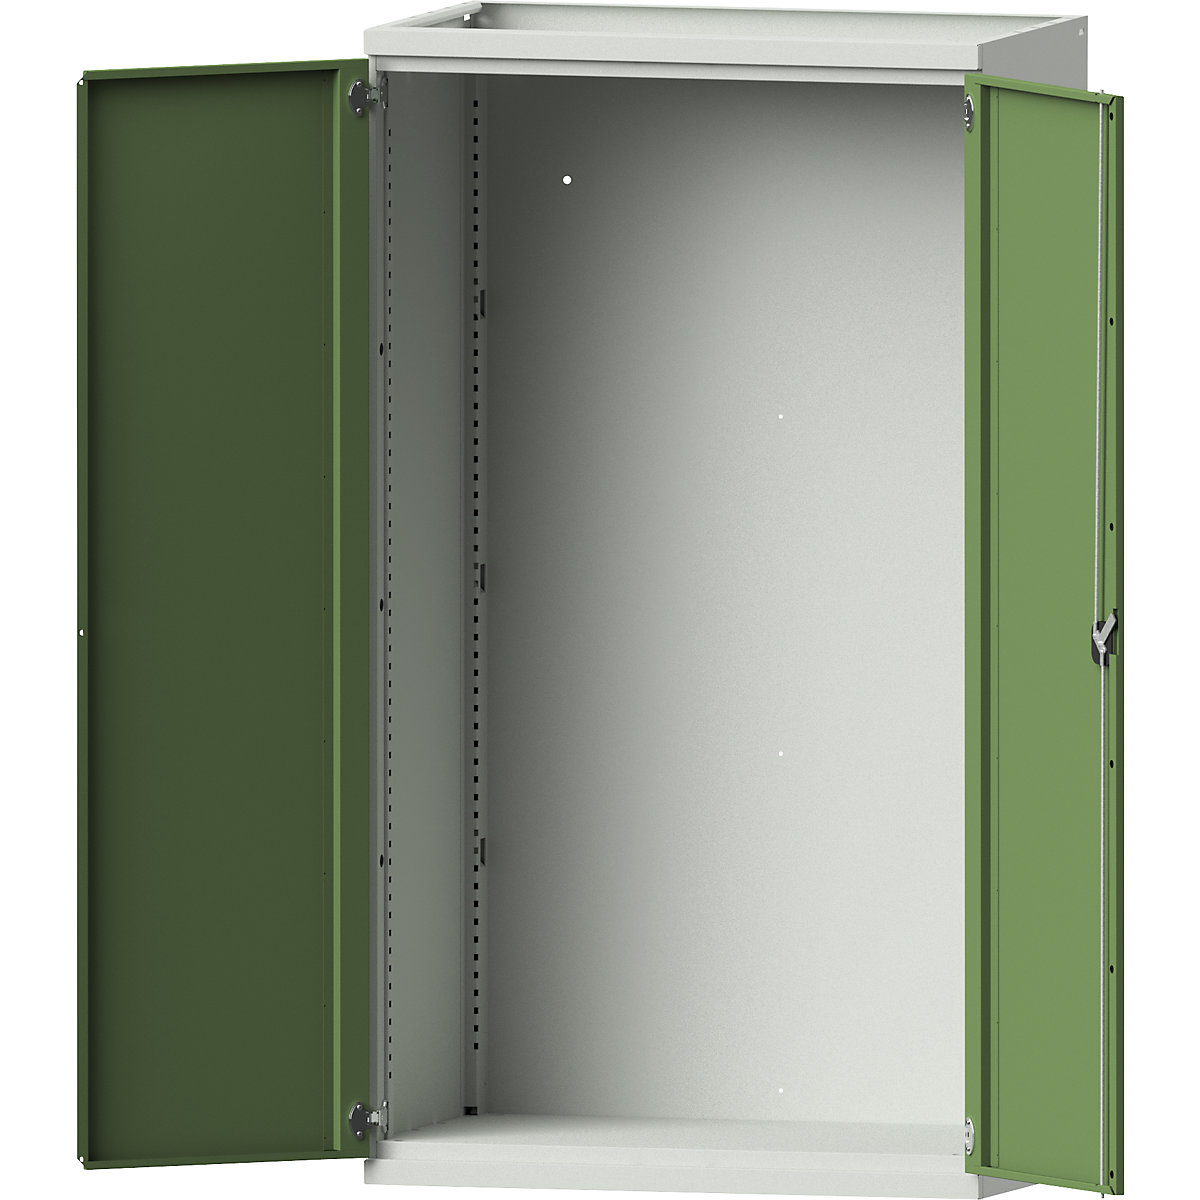 Heavy duty cupboard made of steel – eurokraft pro, empty cupboard – fit out to individual requirements, light grey / reseda green-9